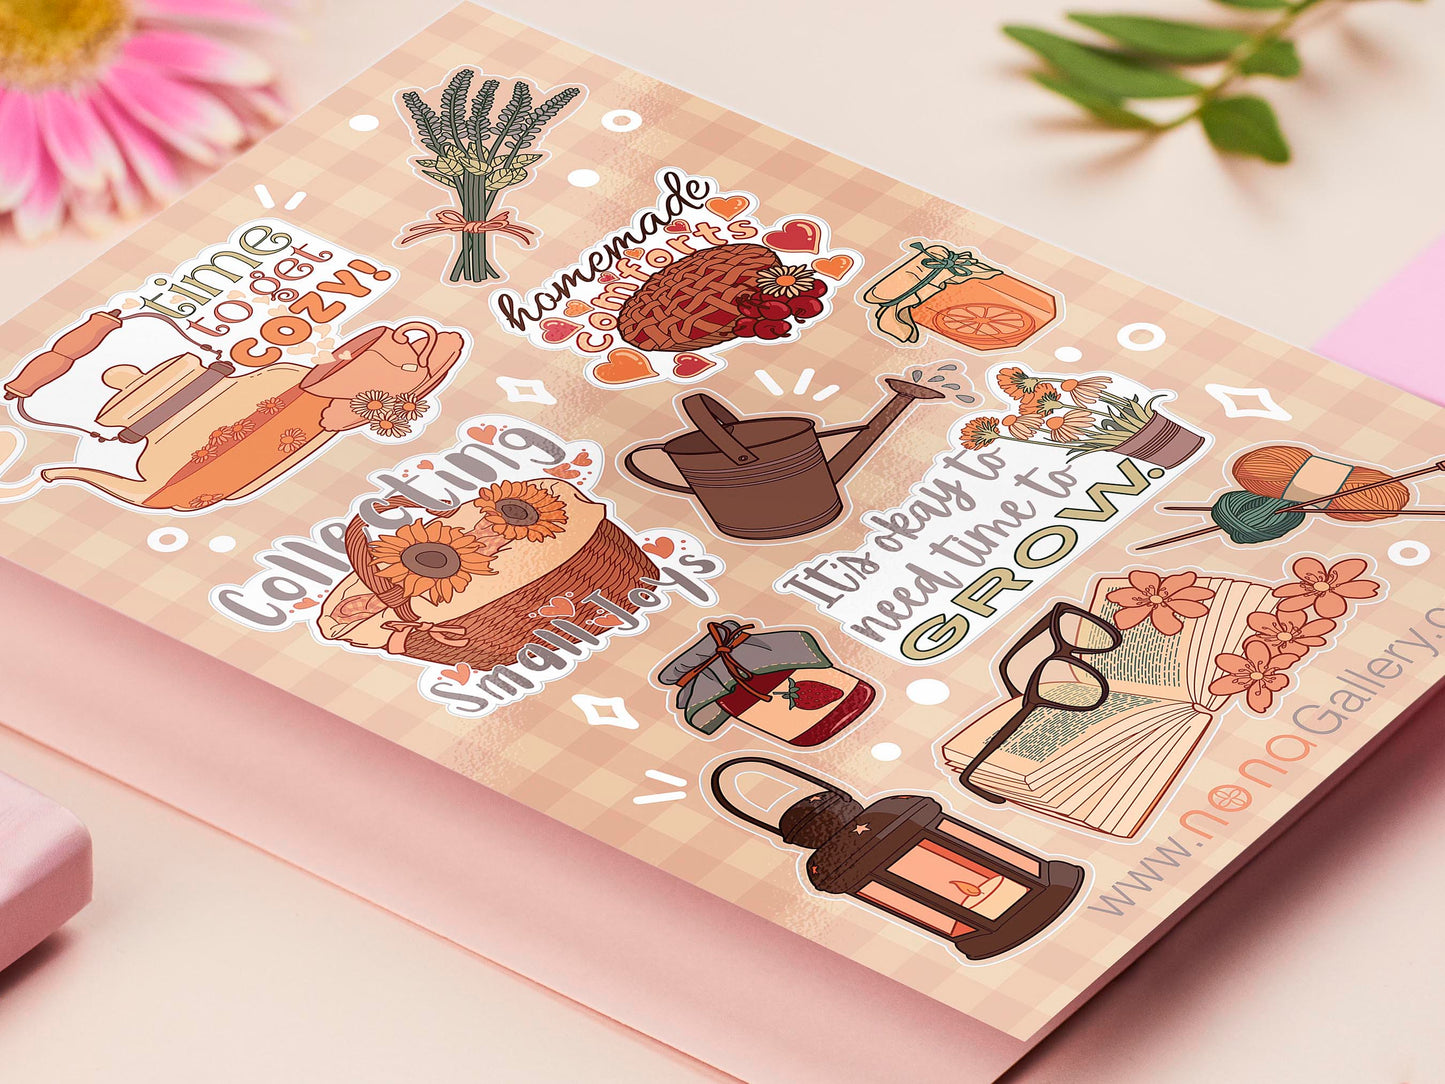 Large sticker sheet of different digital illustration cartoon cottagecore items such as jams, jars, baking, tea, herbs, knitting and books.